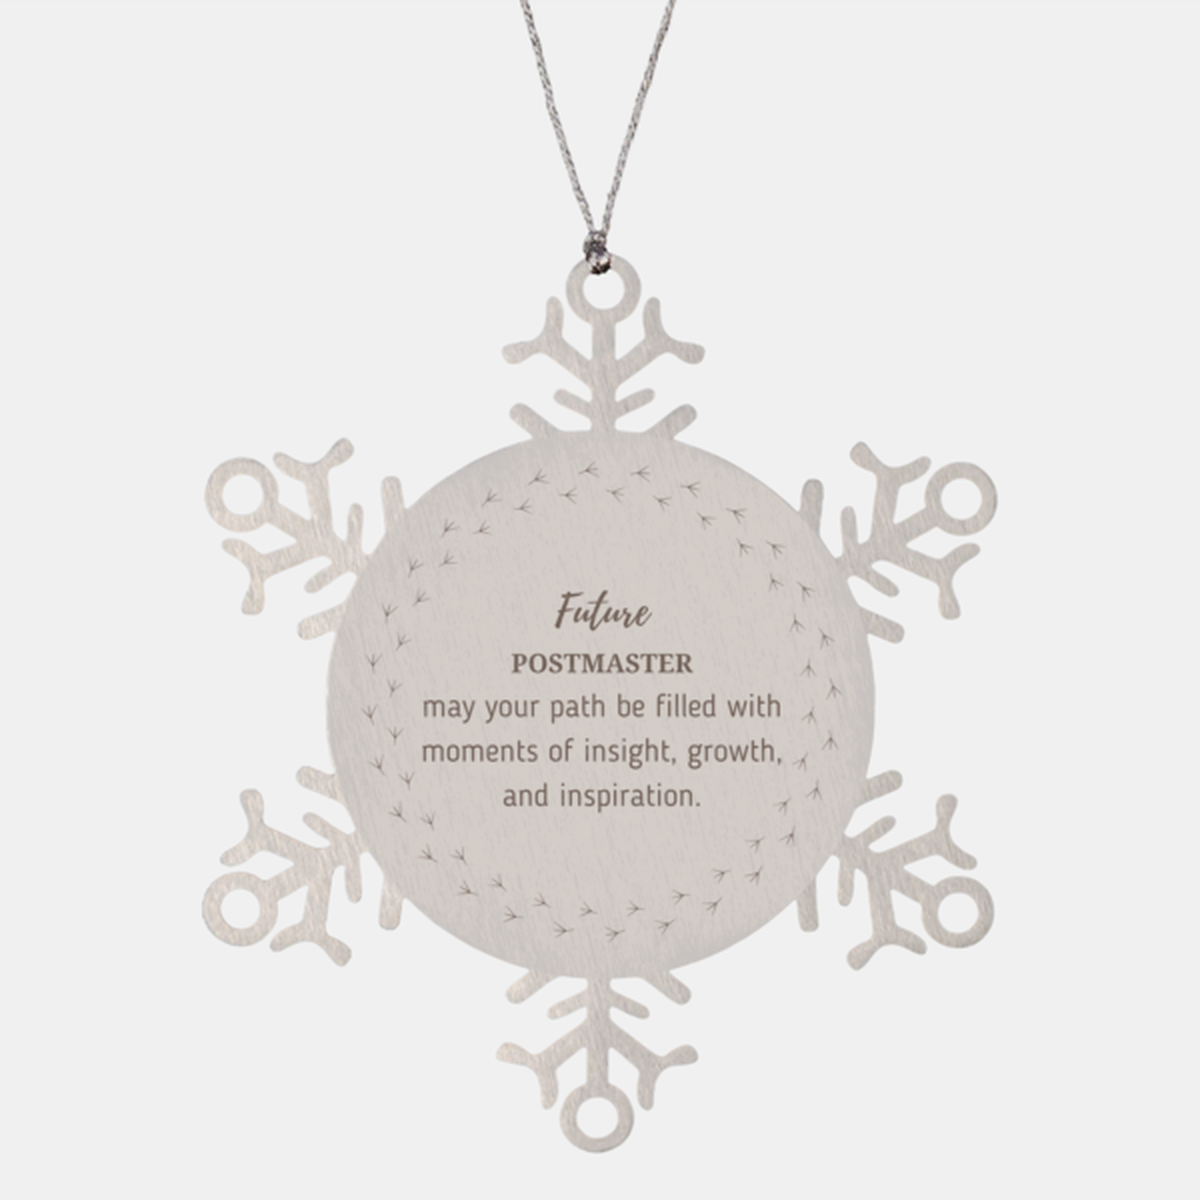 Future Postmaster Gifts, May your path be filled with moments of insight, Graduation Gifts for New Postmaster, Christmas Unique Snowflake Ornament For Men, Women, Friends